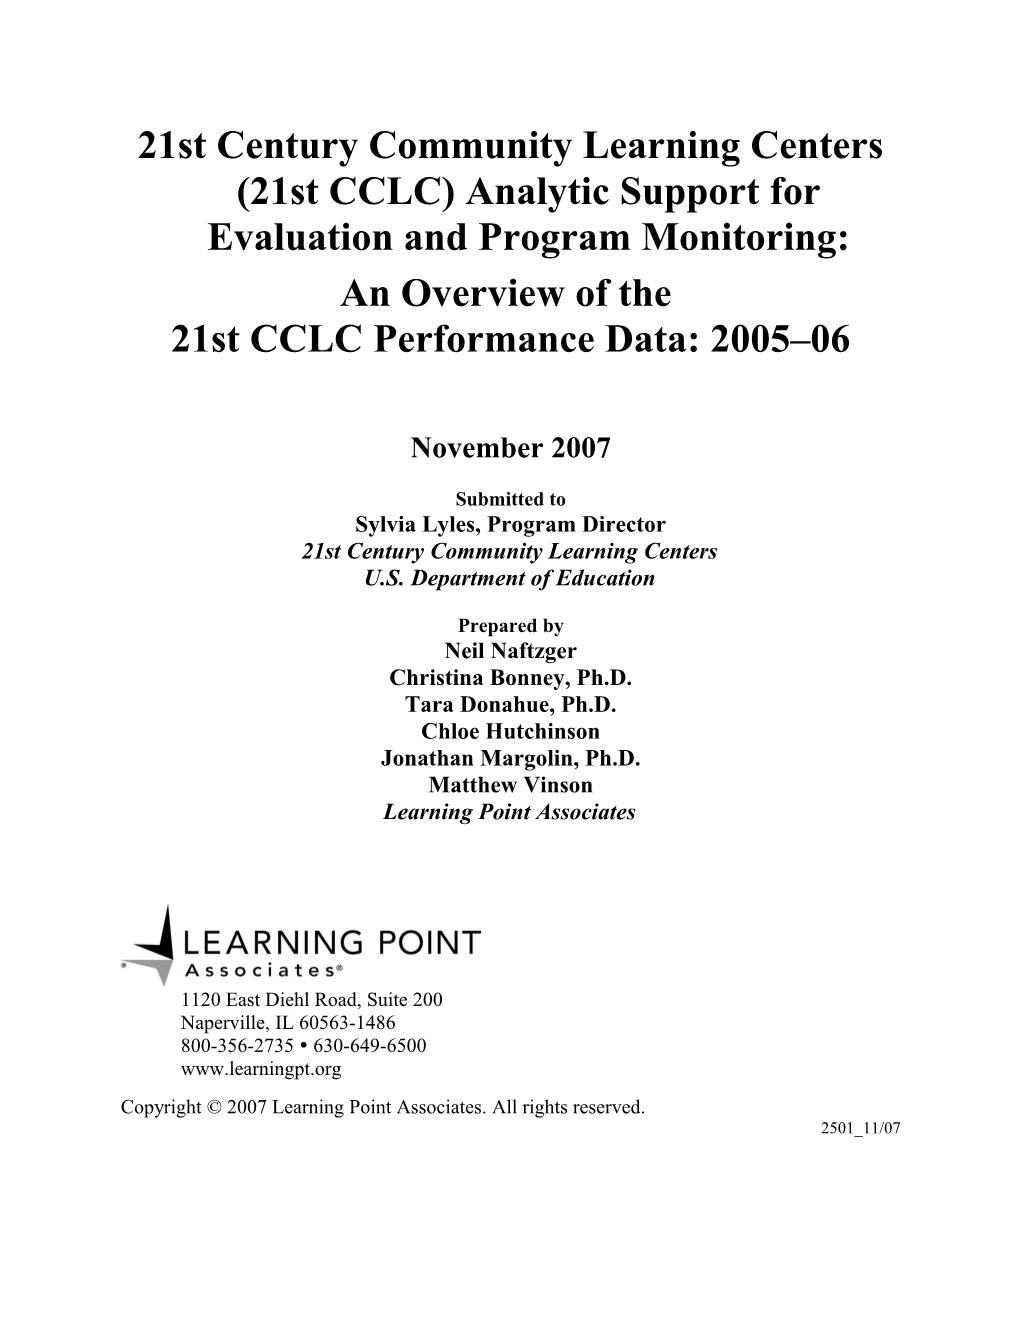 21St Century Community Learning Centers, Overview of Performance Data: 2005-06 (MS Word)